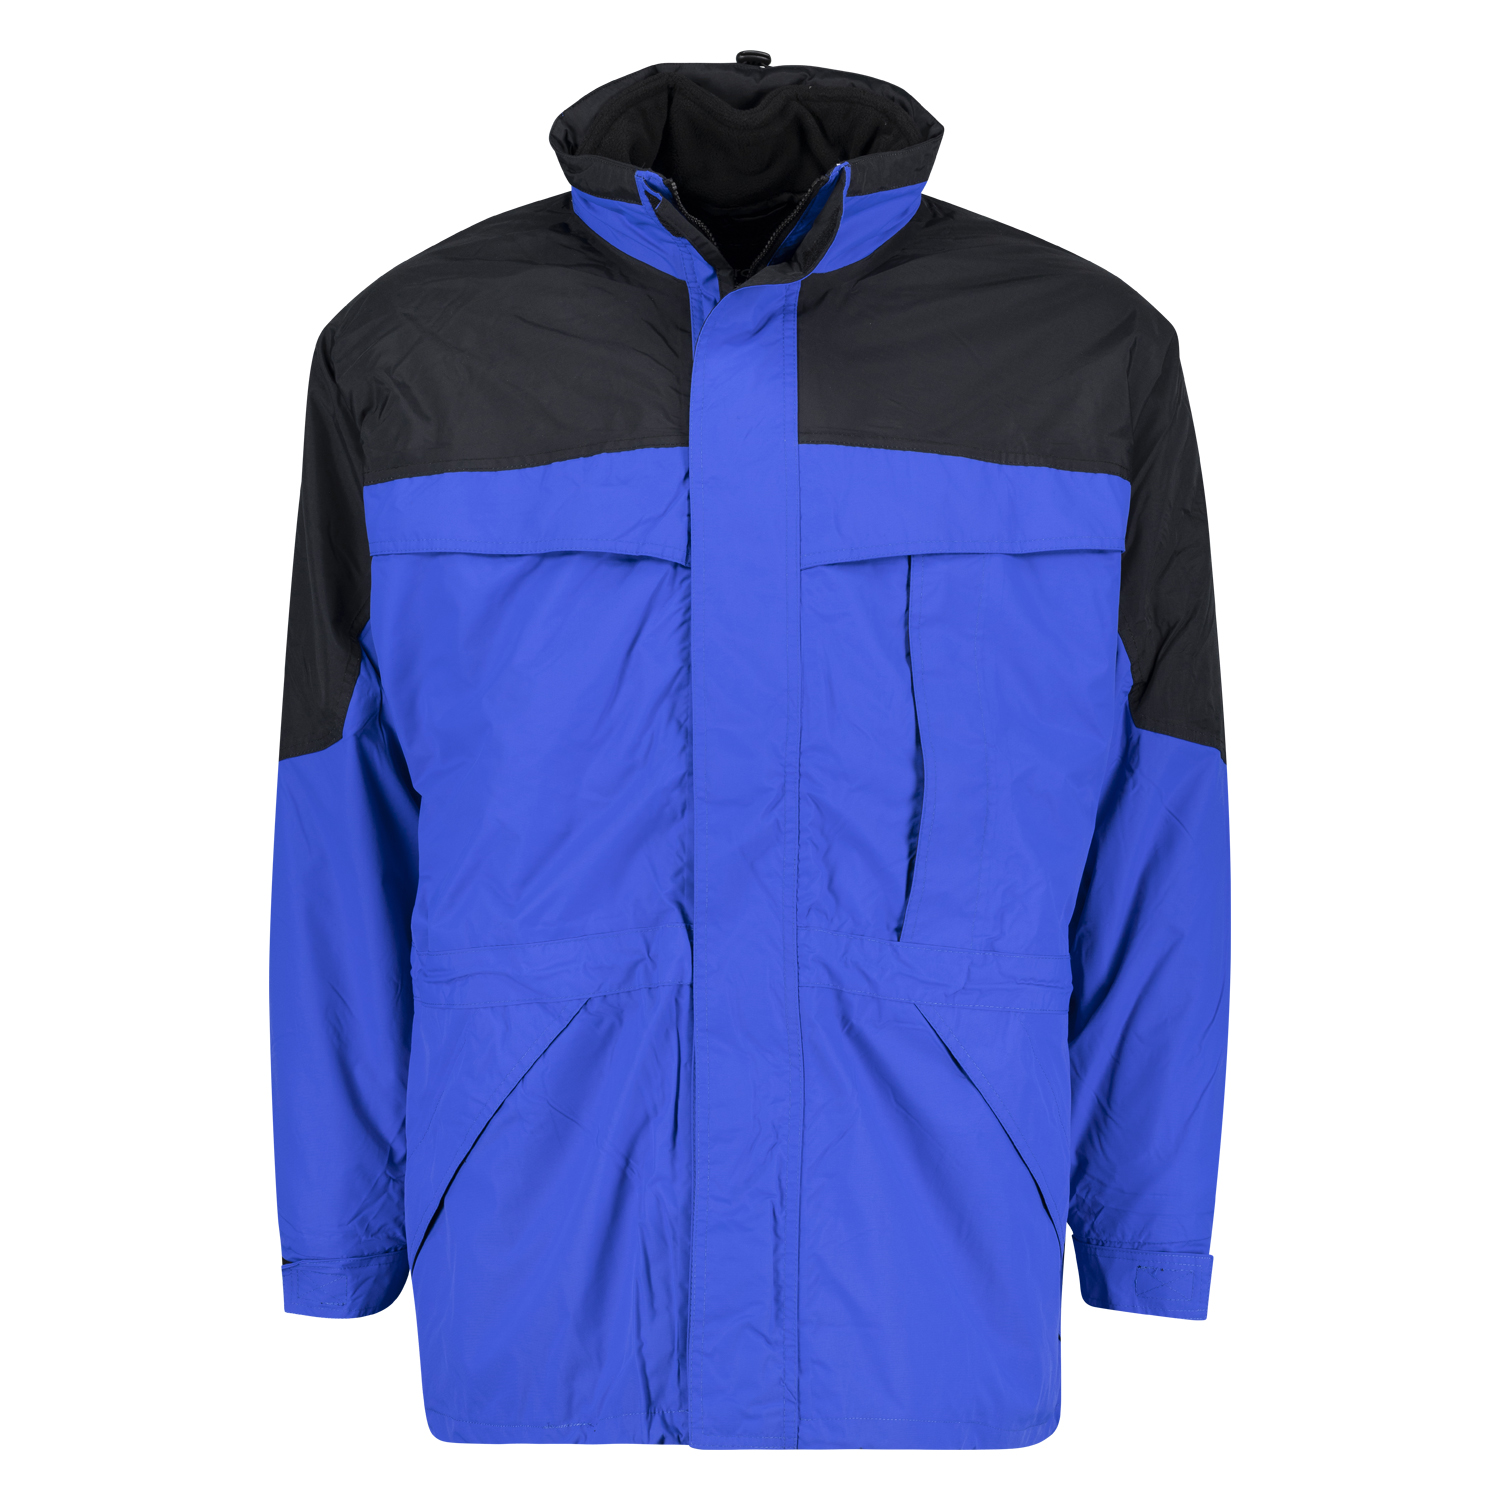 Blue 3in1 jacket by marc&mark in oversizes until 10XL